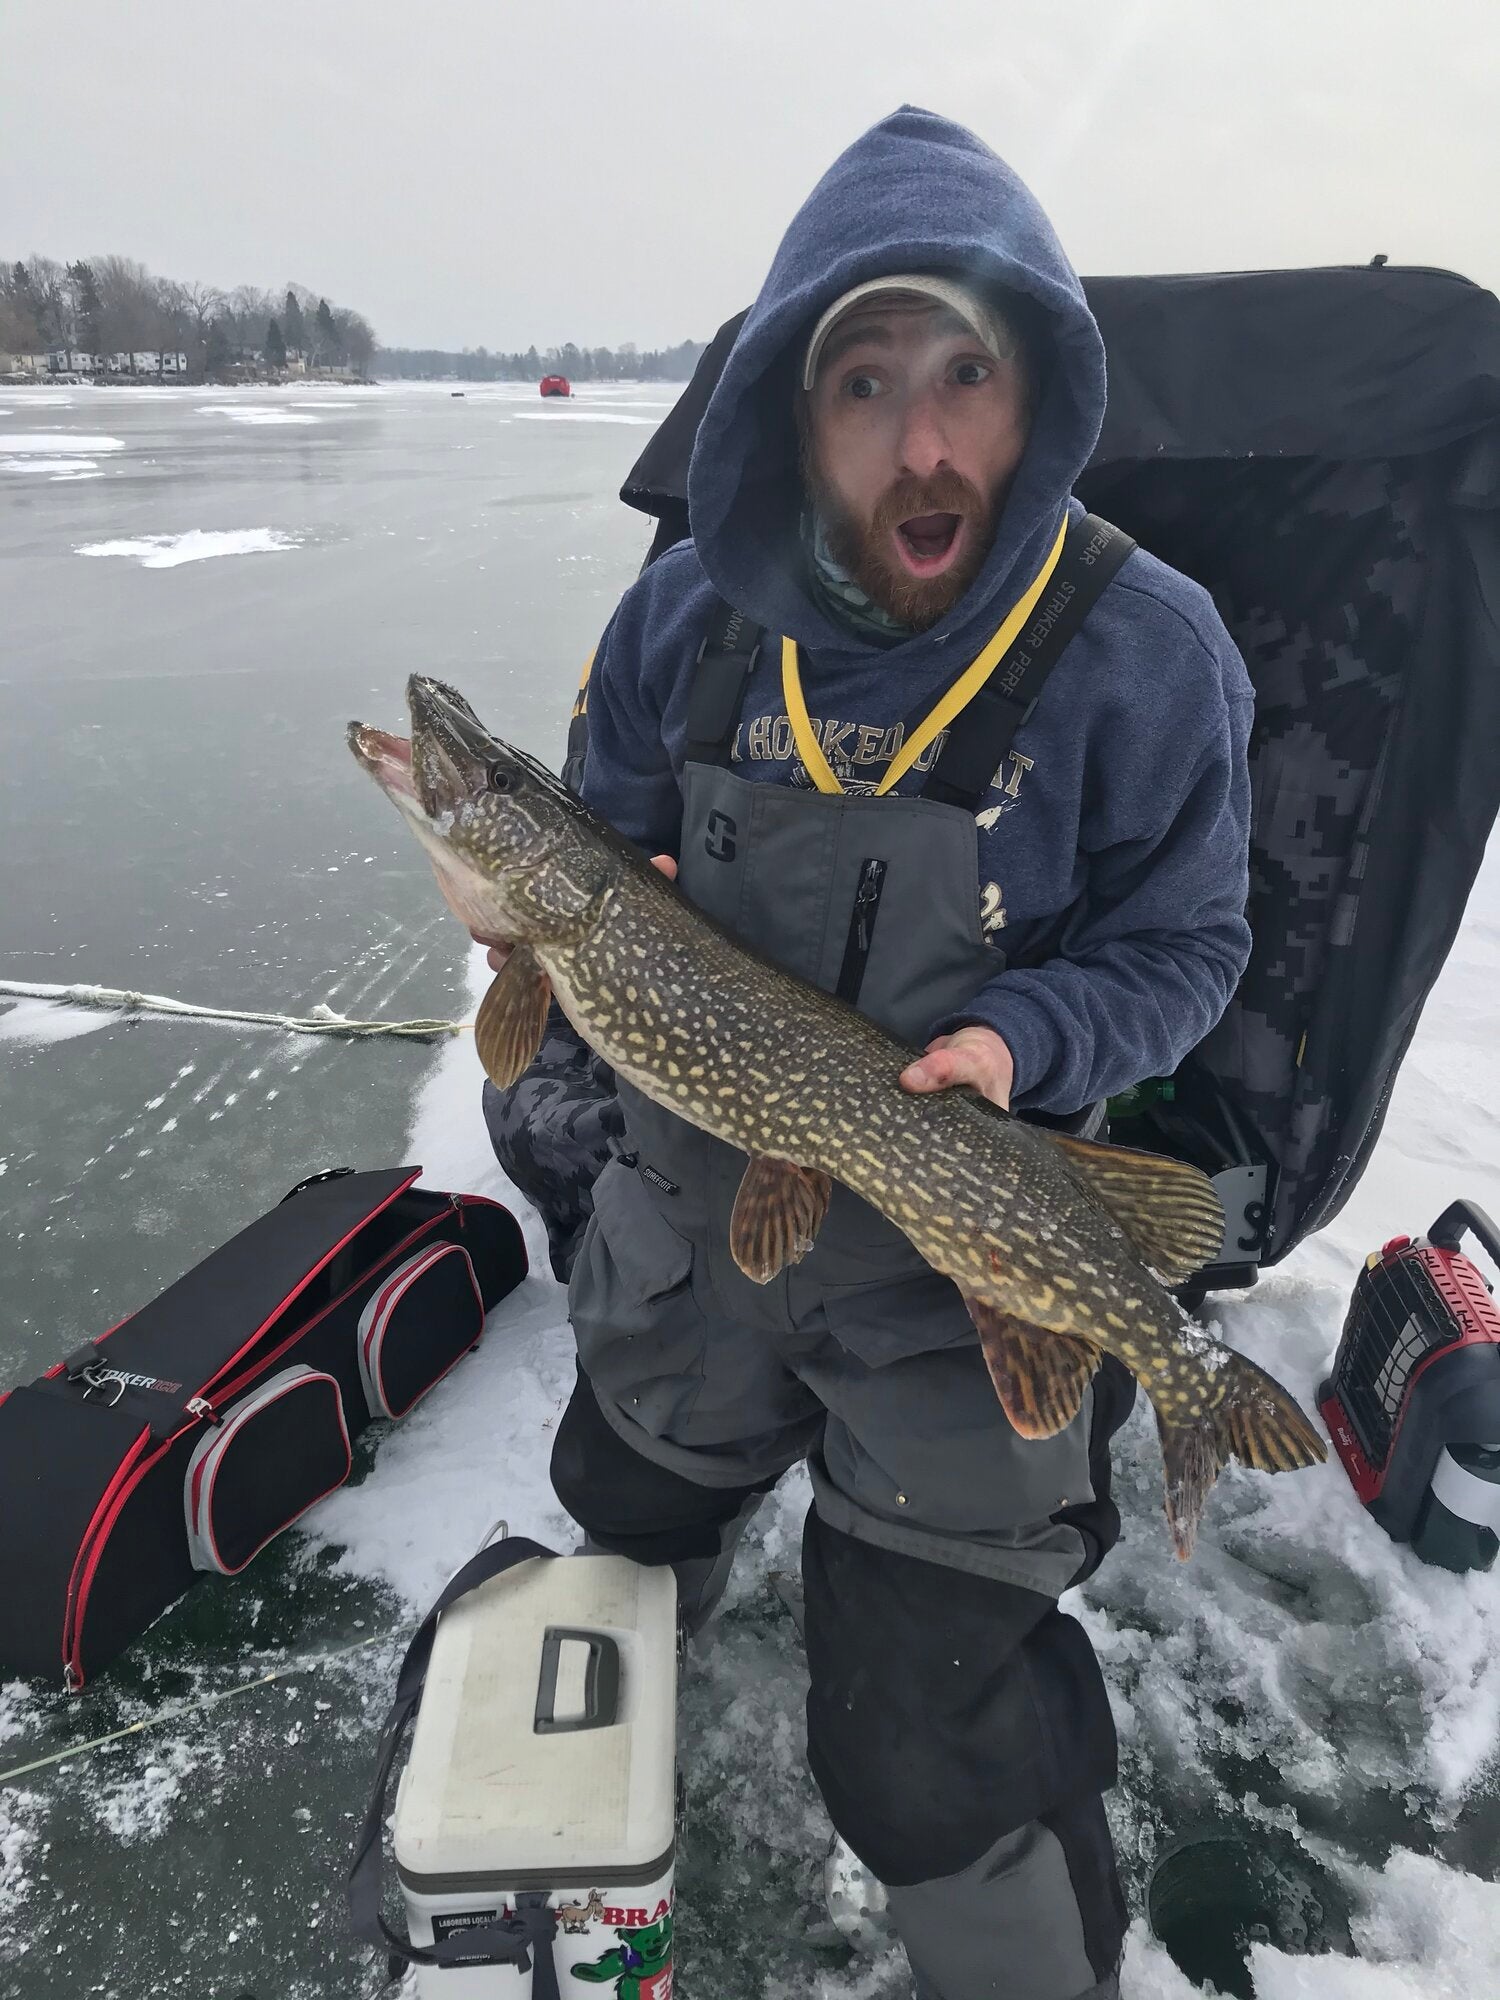 "BULLNOSE" ICE FISHING TIP DOWN-TIP UP CUSTOMER REVIEW